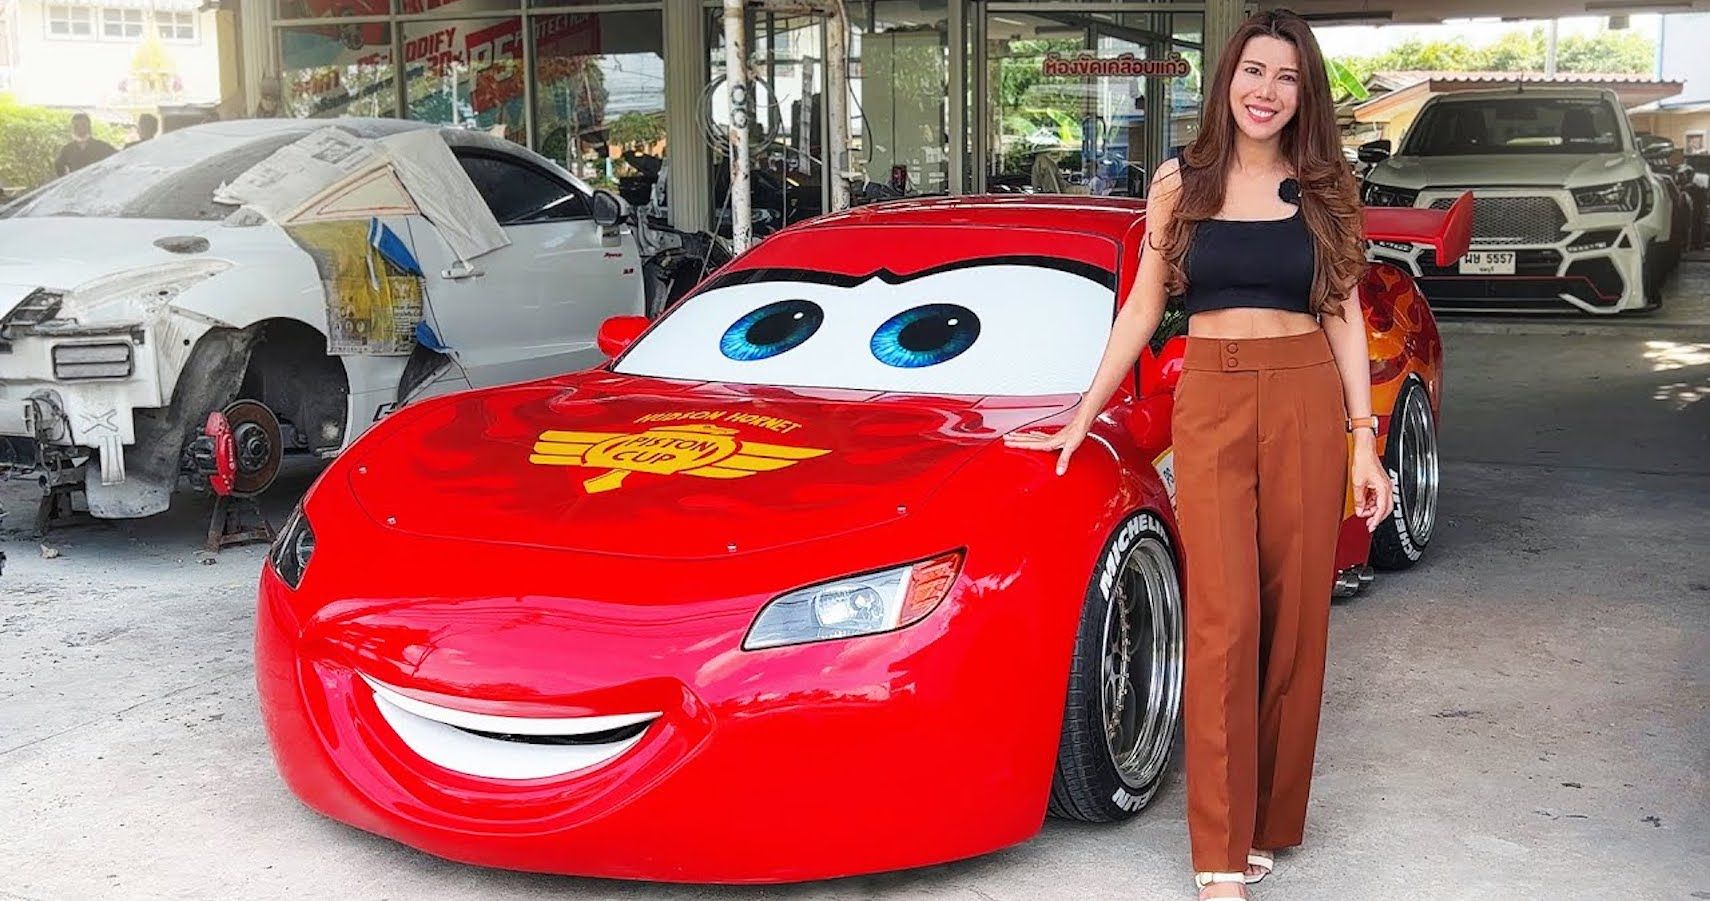 Cleanest And Most Impressive Lightning McQueen Build Spotted In Thailand